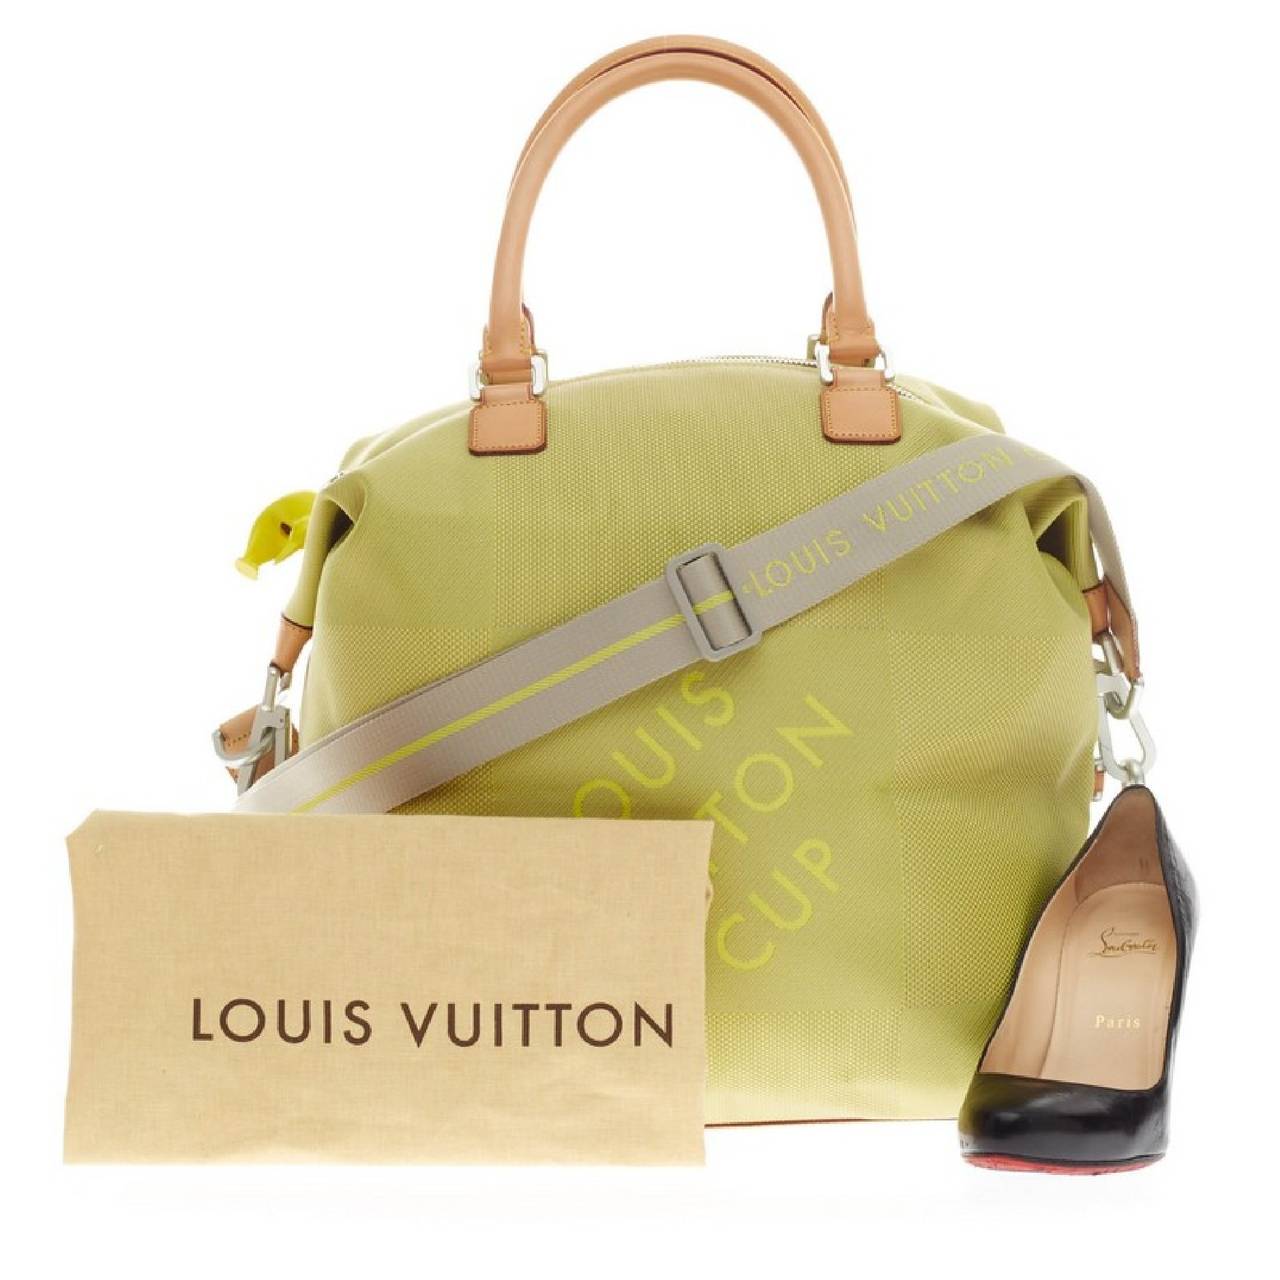 This authentic Louis Vuitton Cup Geant Cube Bag Limited Edition Canvas released only during the brand's yachting competition in 2002 is a hard-to-find piece perfect for light traveling. Crafted in eye-catching lime green and yellow damier geant